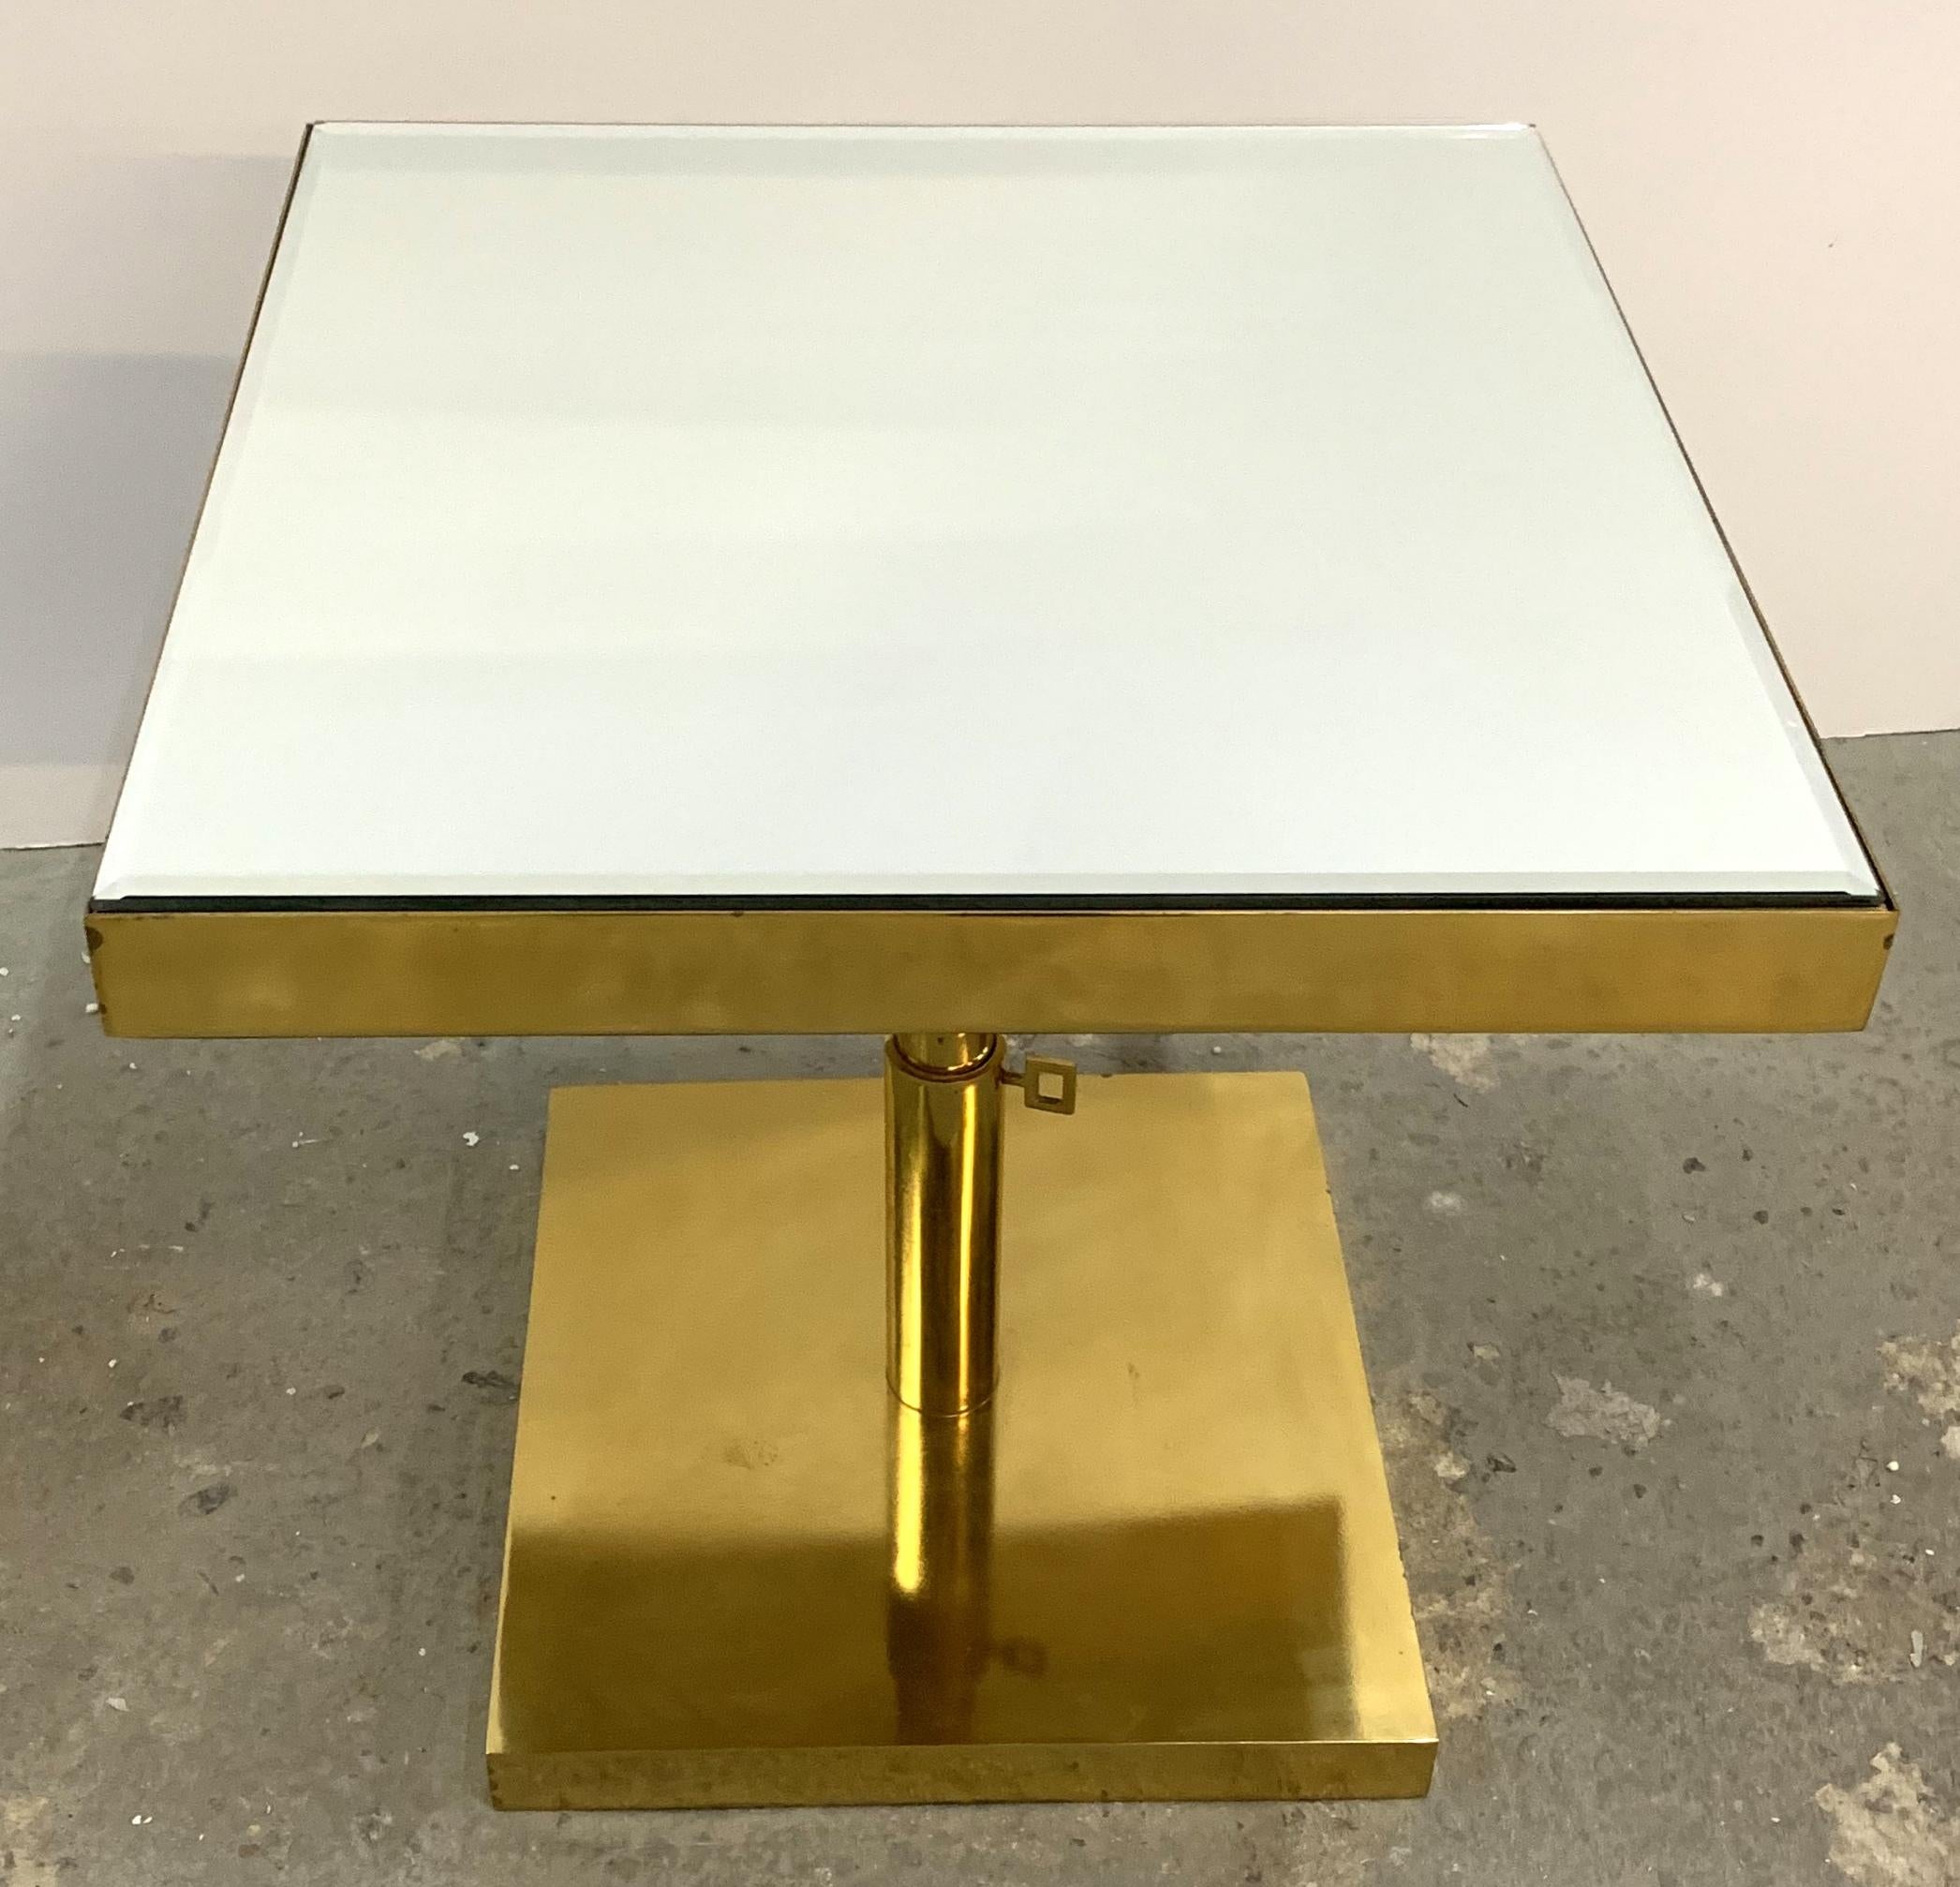 A wonderful Mid-Century Modern bronze and beveled mirror, telescoping square side table height is adjustable by 2 knobs.
Purchased from Lorin Marsh.